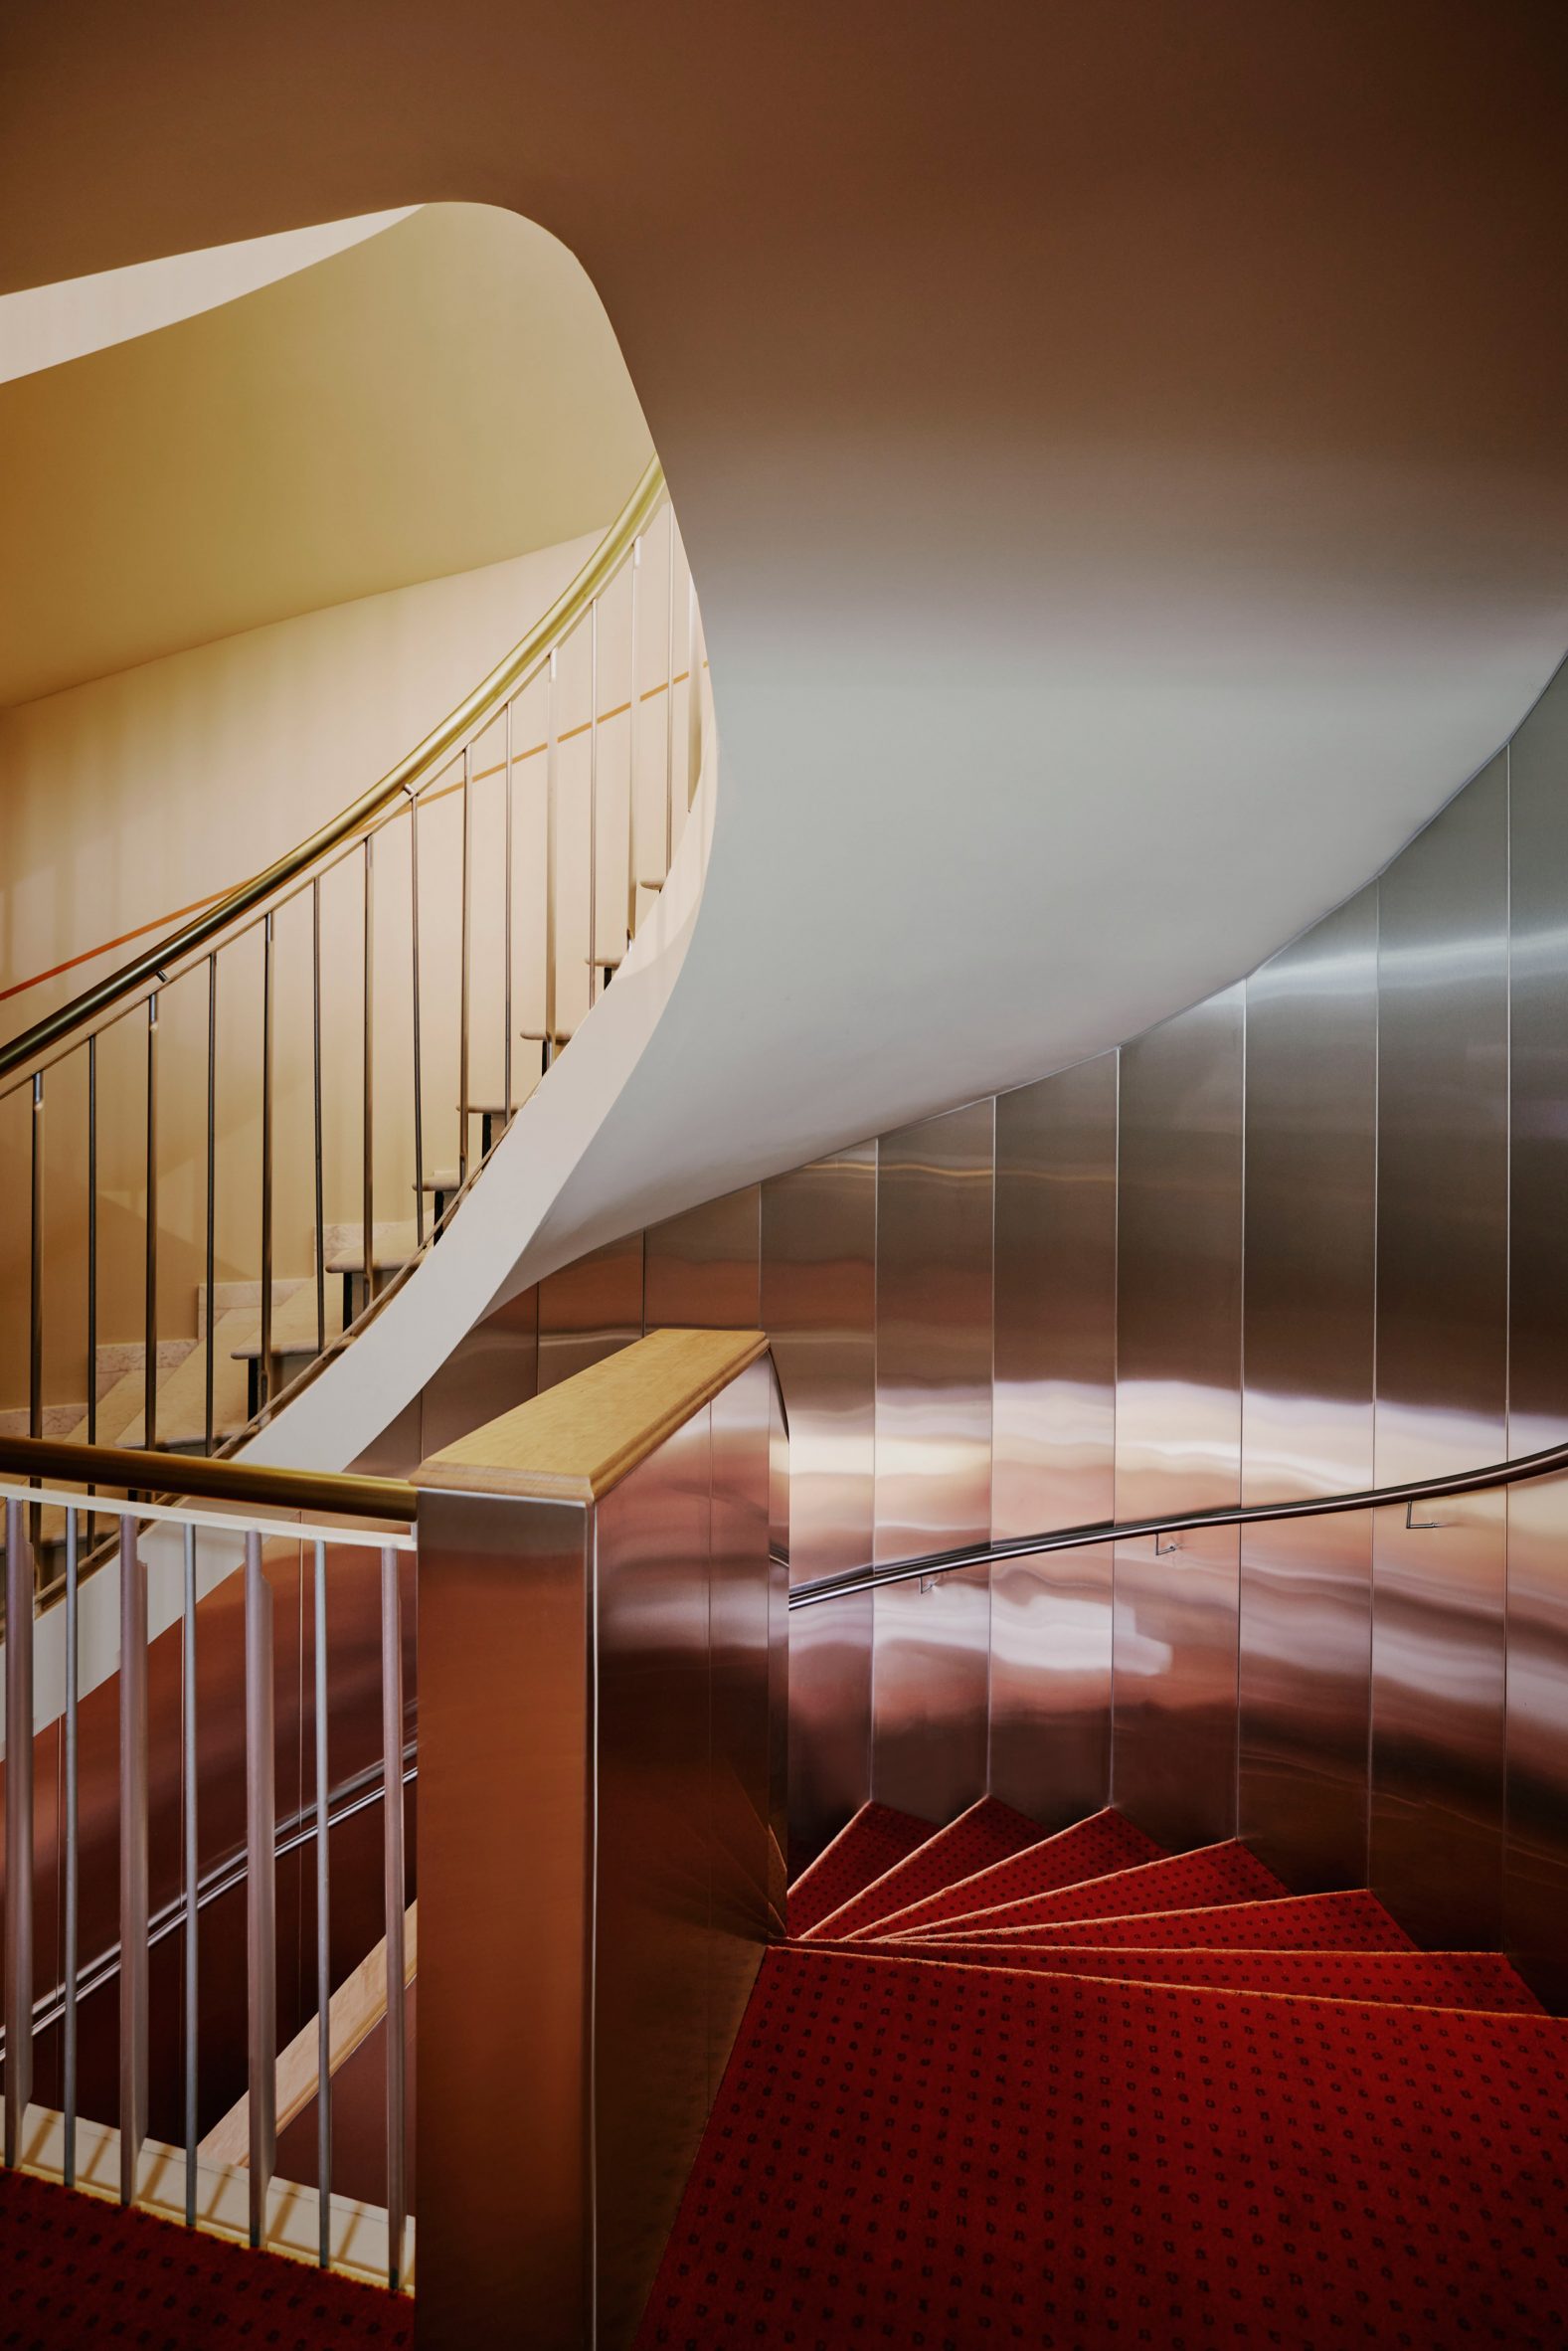 Stainless steel clad staircase in Locke hotel 